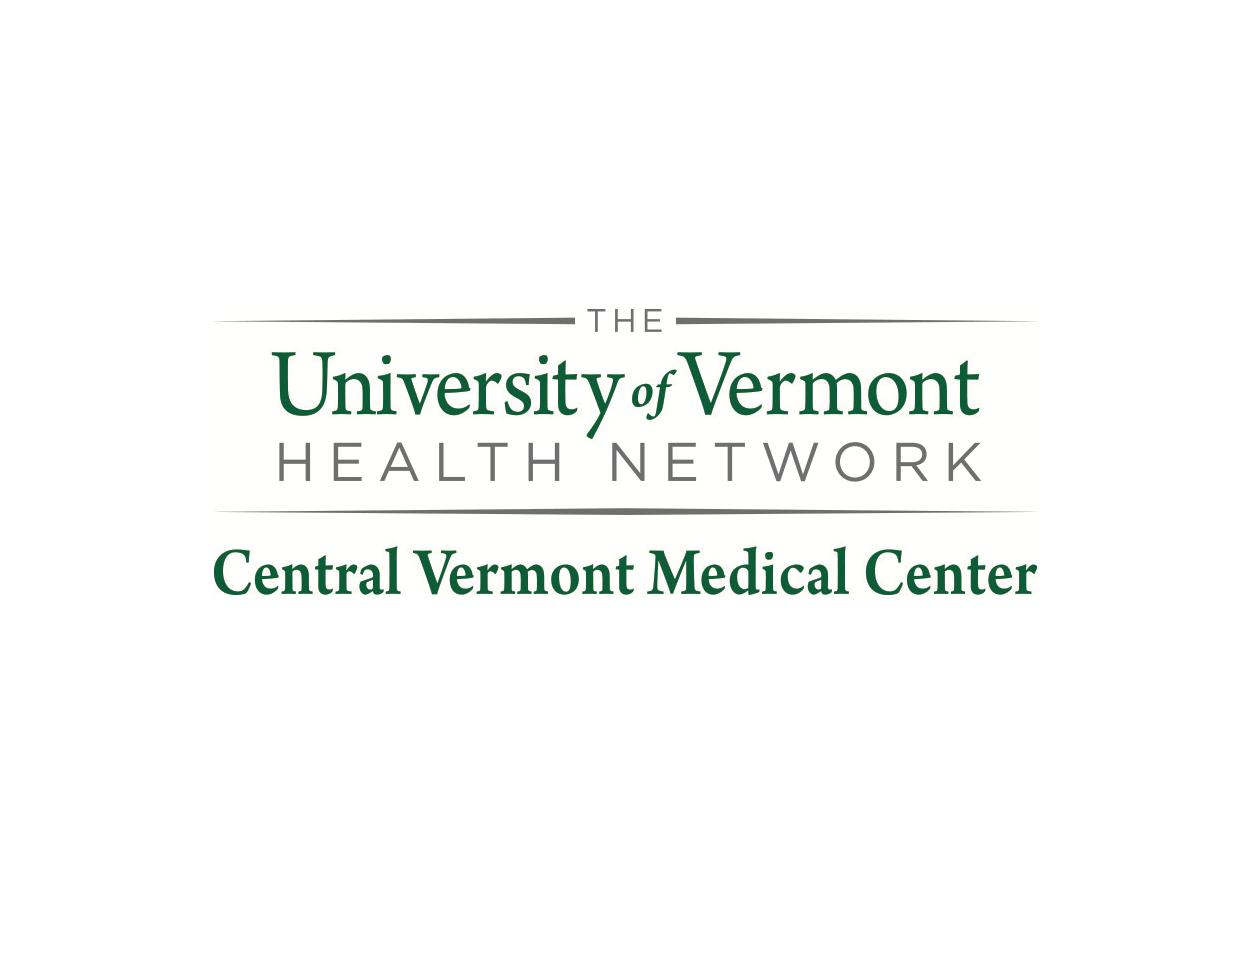 Rehabilitation Therapy - Waterbury, UVM Health Network - Central Vermont Medical Center - Waterbury, VT 05676 - (802)371-4242 | ShowMeLocal.com